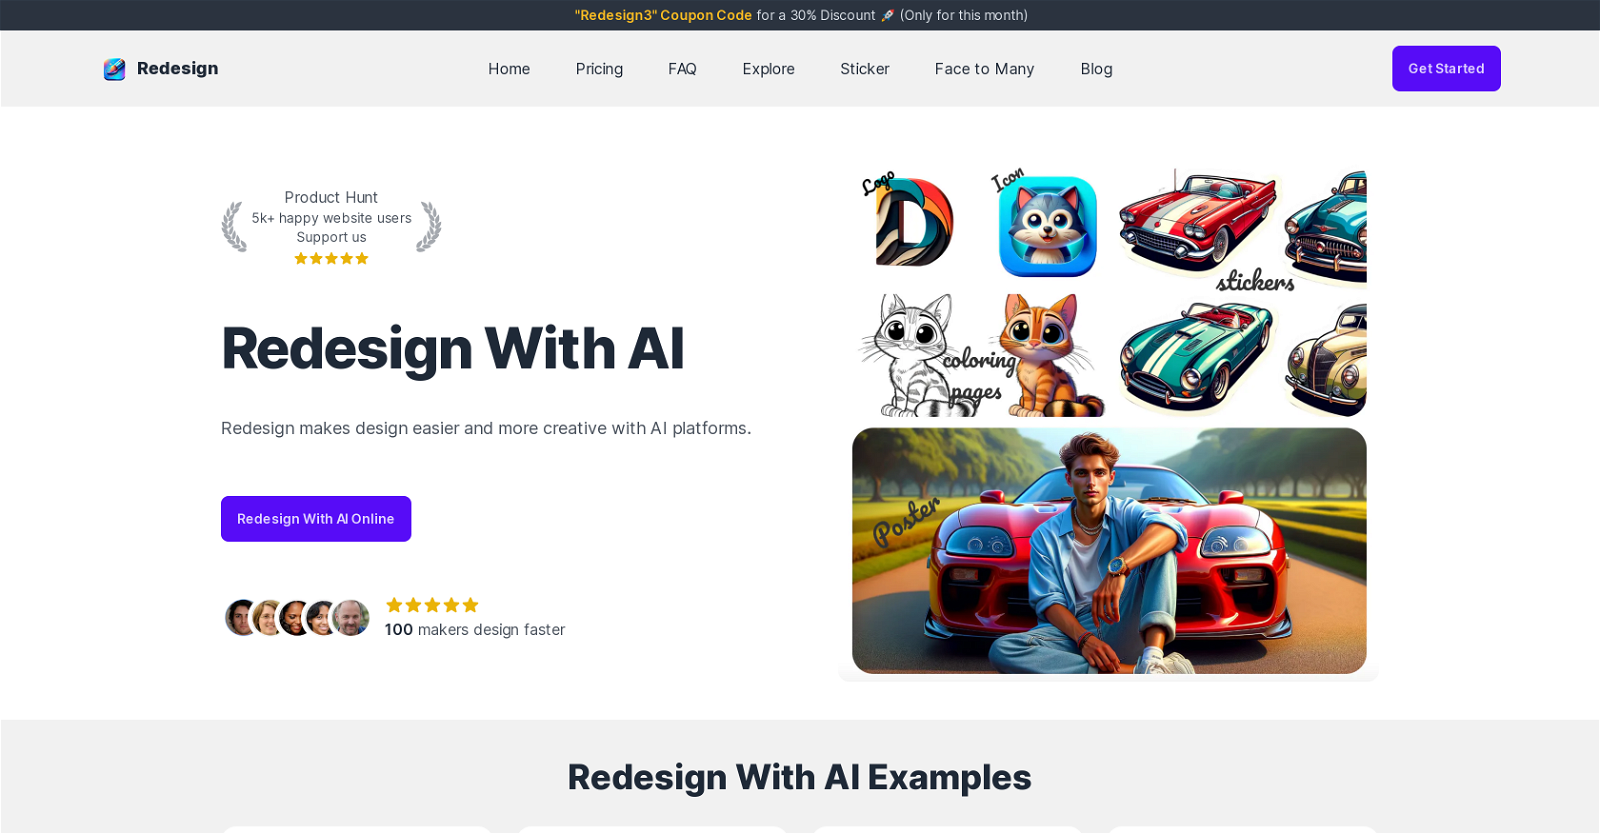 Redesign With AI website